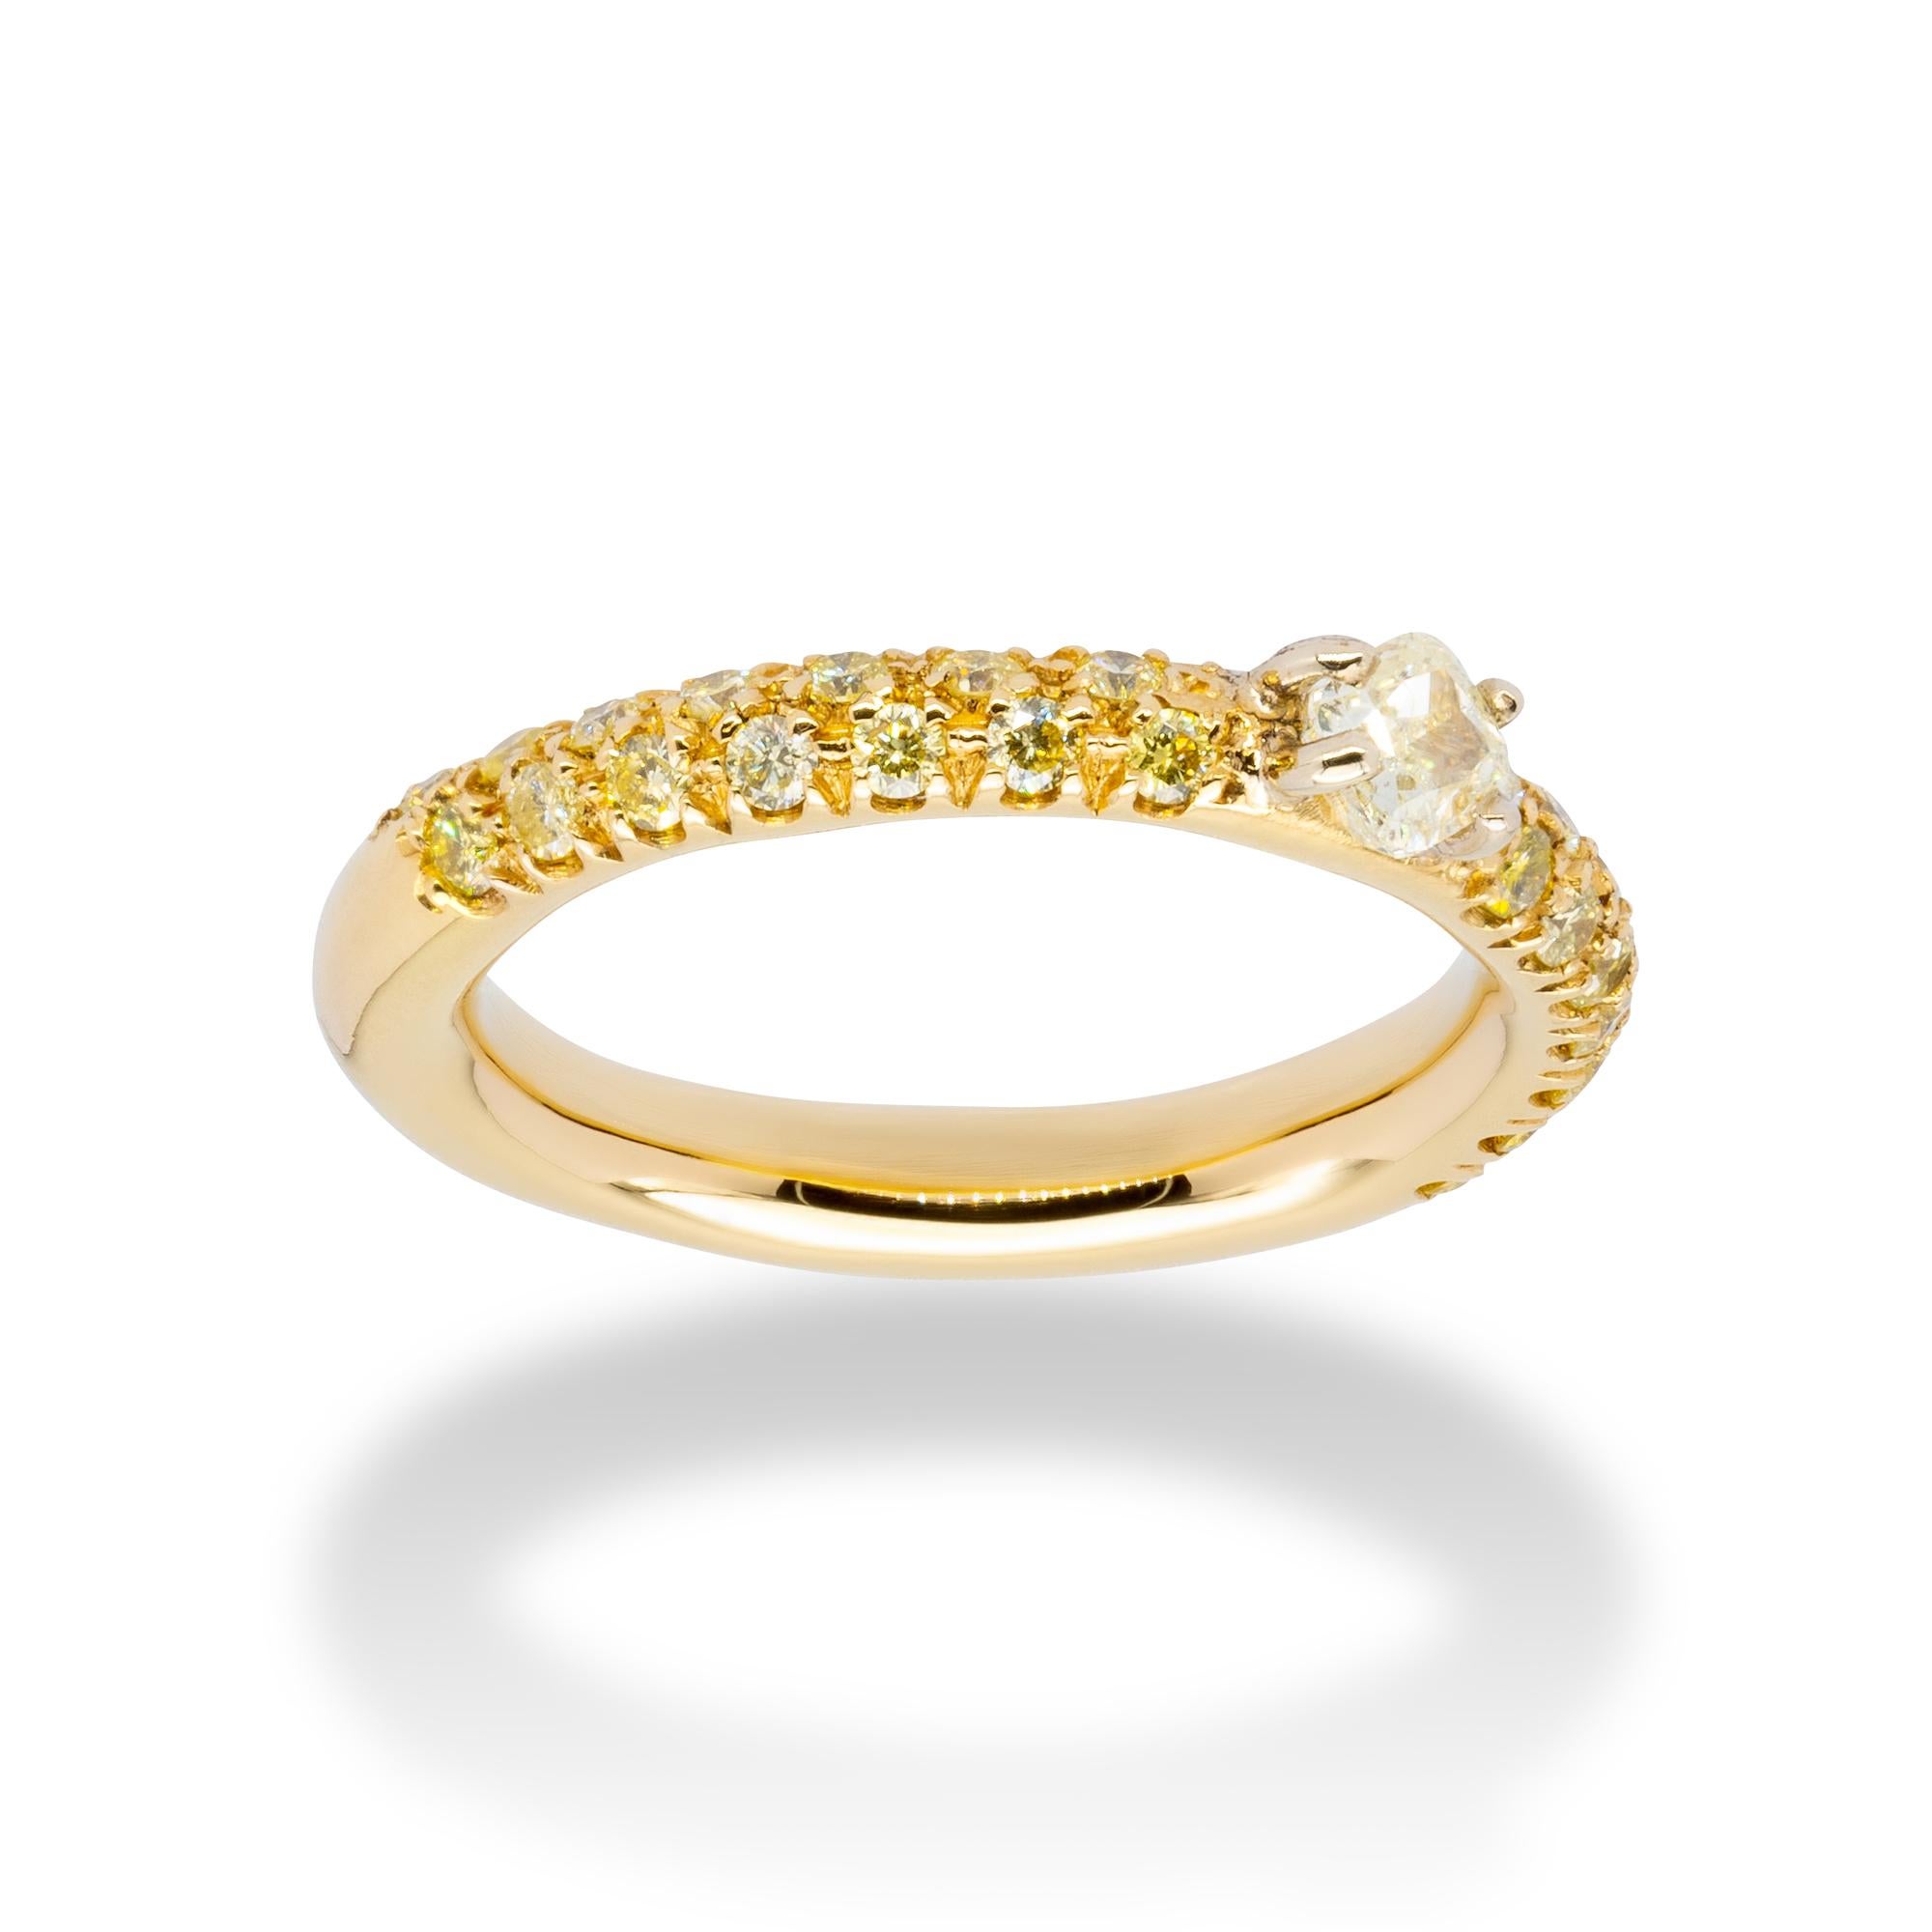 A Ring from d'Avossa Sunshine Collection in yellow 18 kt gold with a pavé of 0.65 cts of fancy yellow natural diamonds and a central fancy natural diamond of 0.38 cts
1.03 carats total diamond weight. 
This Ring has been designed to be worn alone,